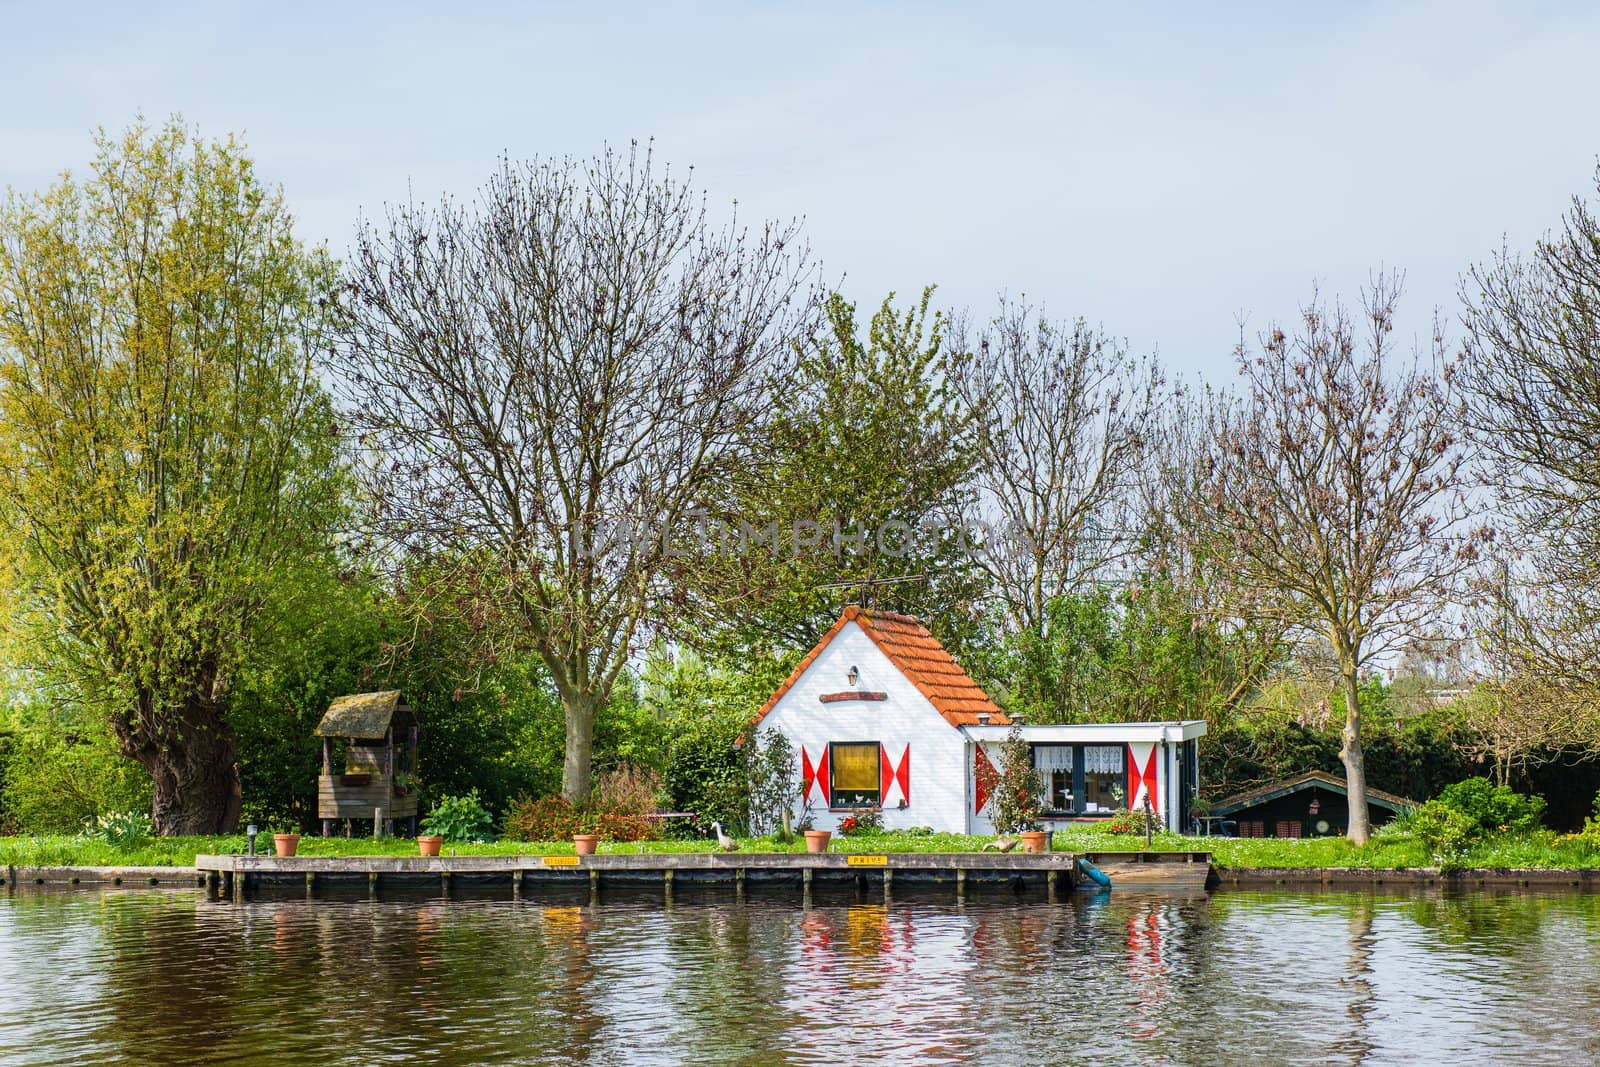 Typical spring holland landscape - dutch house near channel